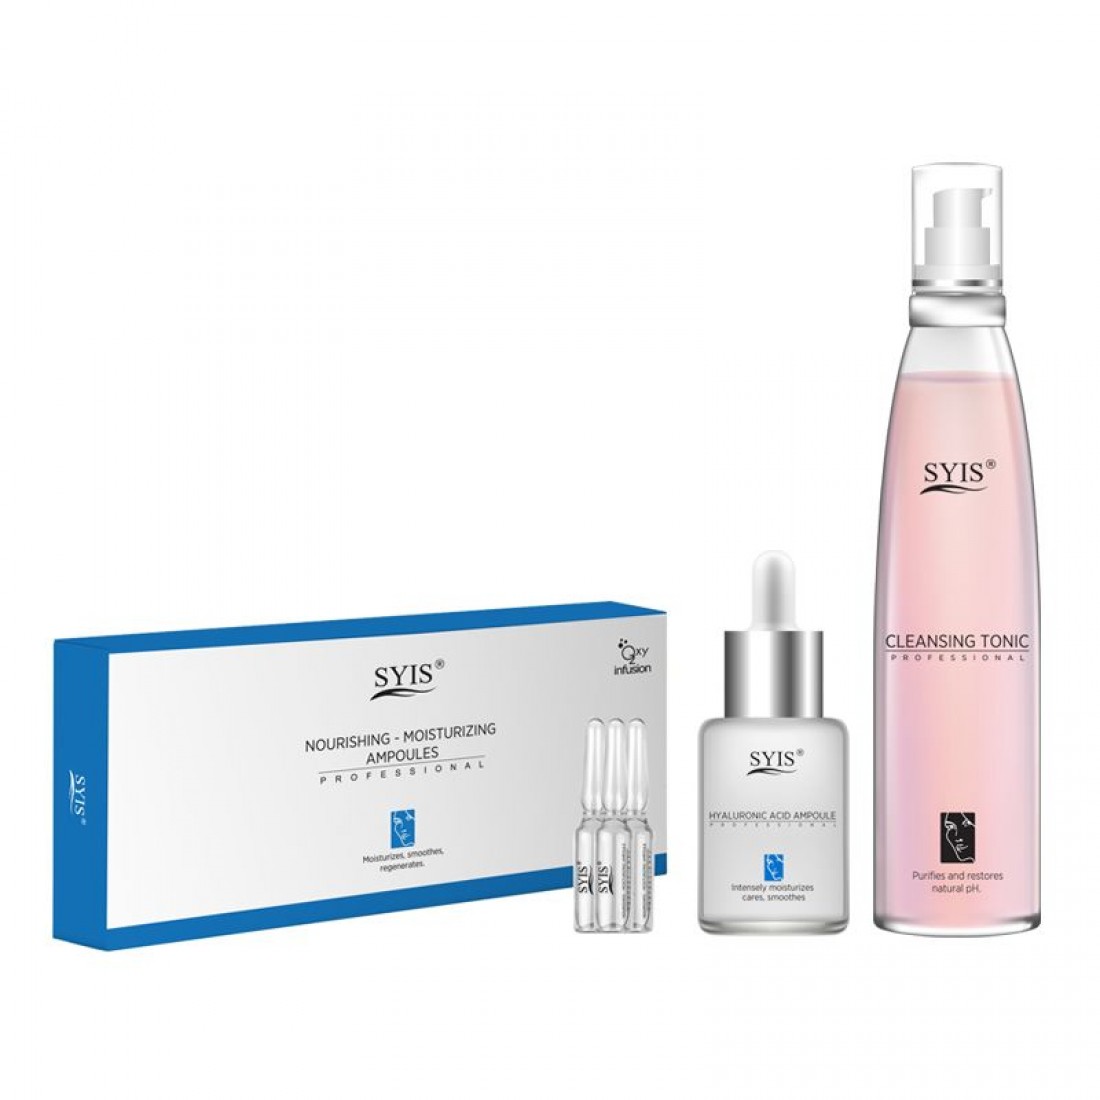 Syis Complete hydration kit - 0125530 FACE CREAMS & SERUM